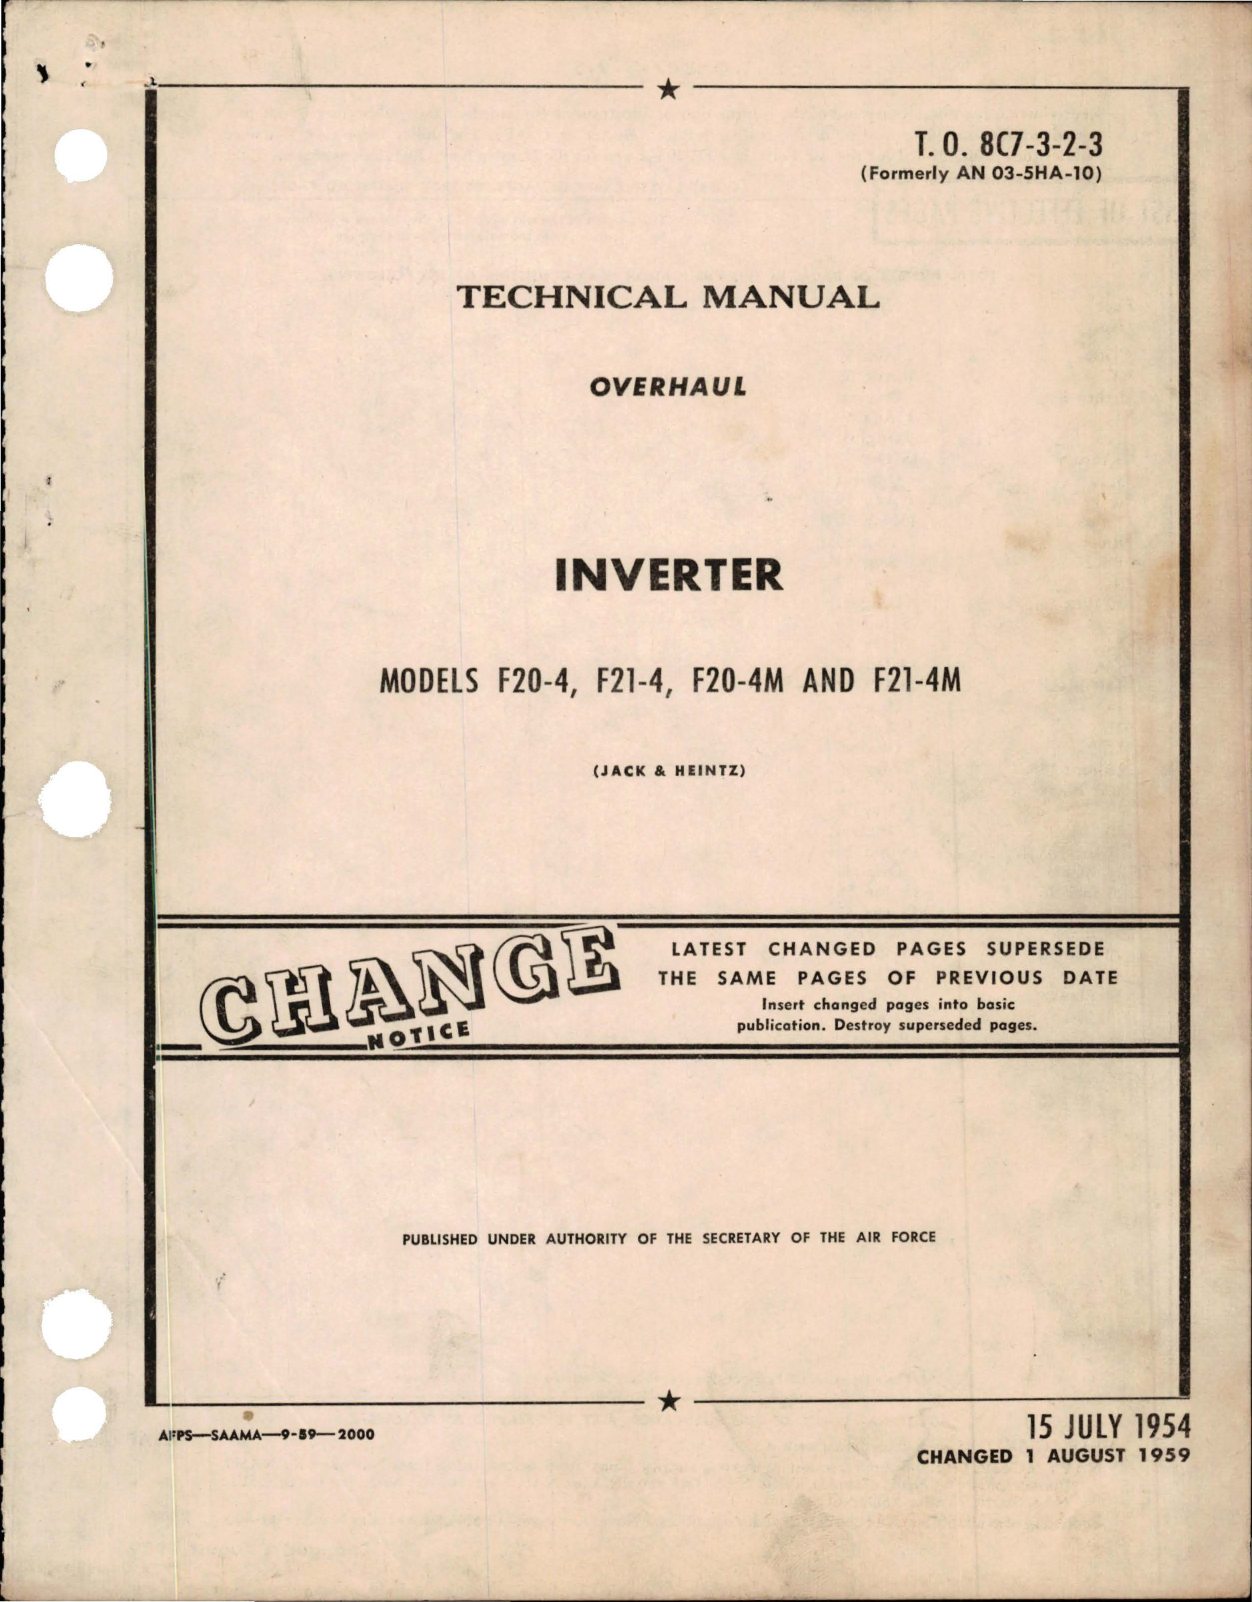 Sample page 1 from AirCorps Library document: Overhaul for Inverter - Models F20-4, F21-4, F20-4M, and F21-4M